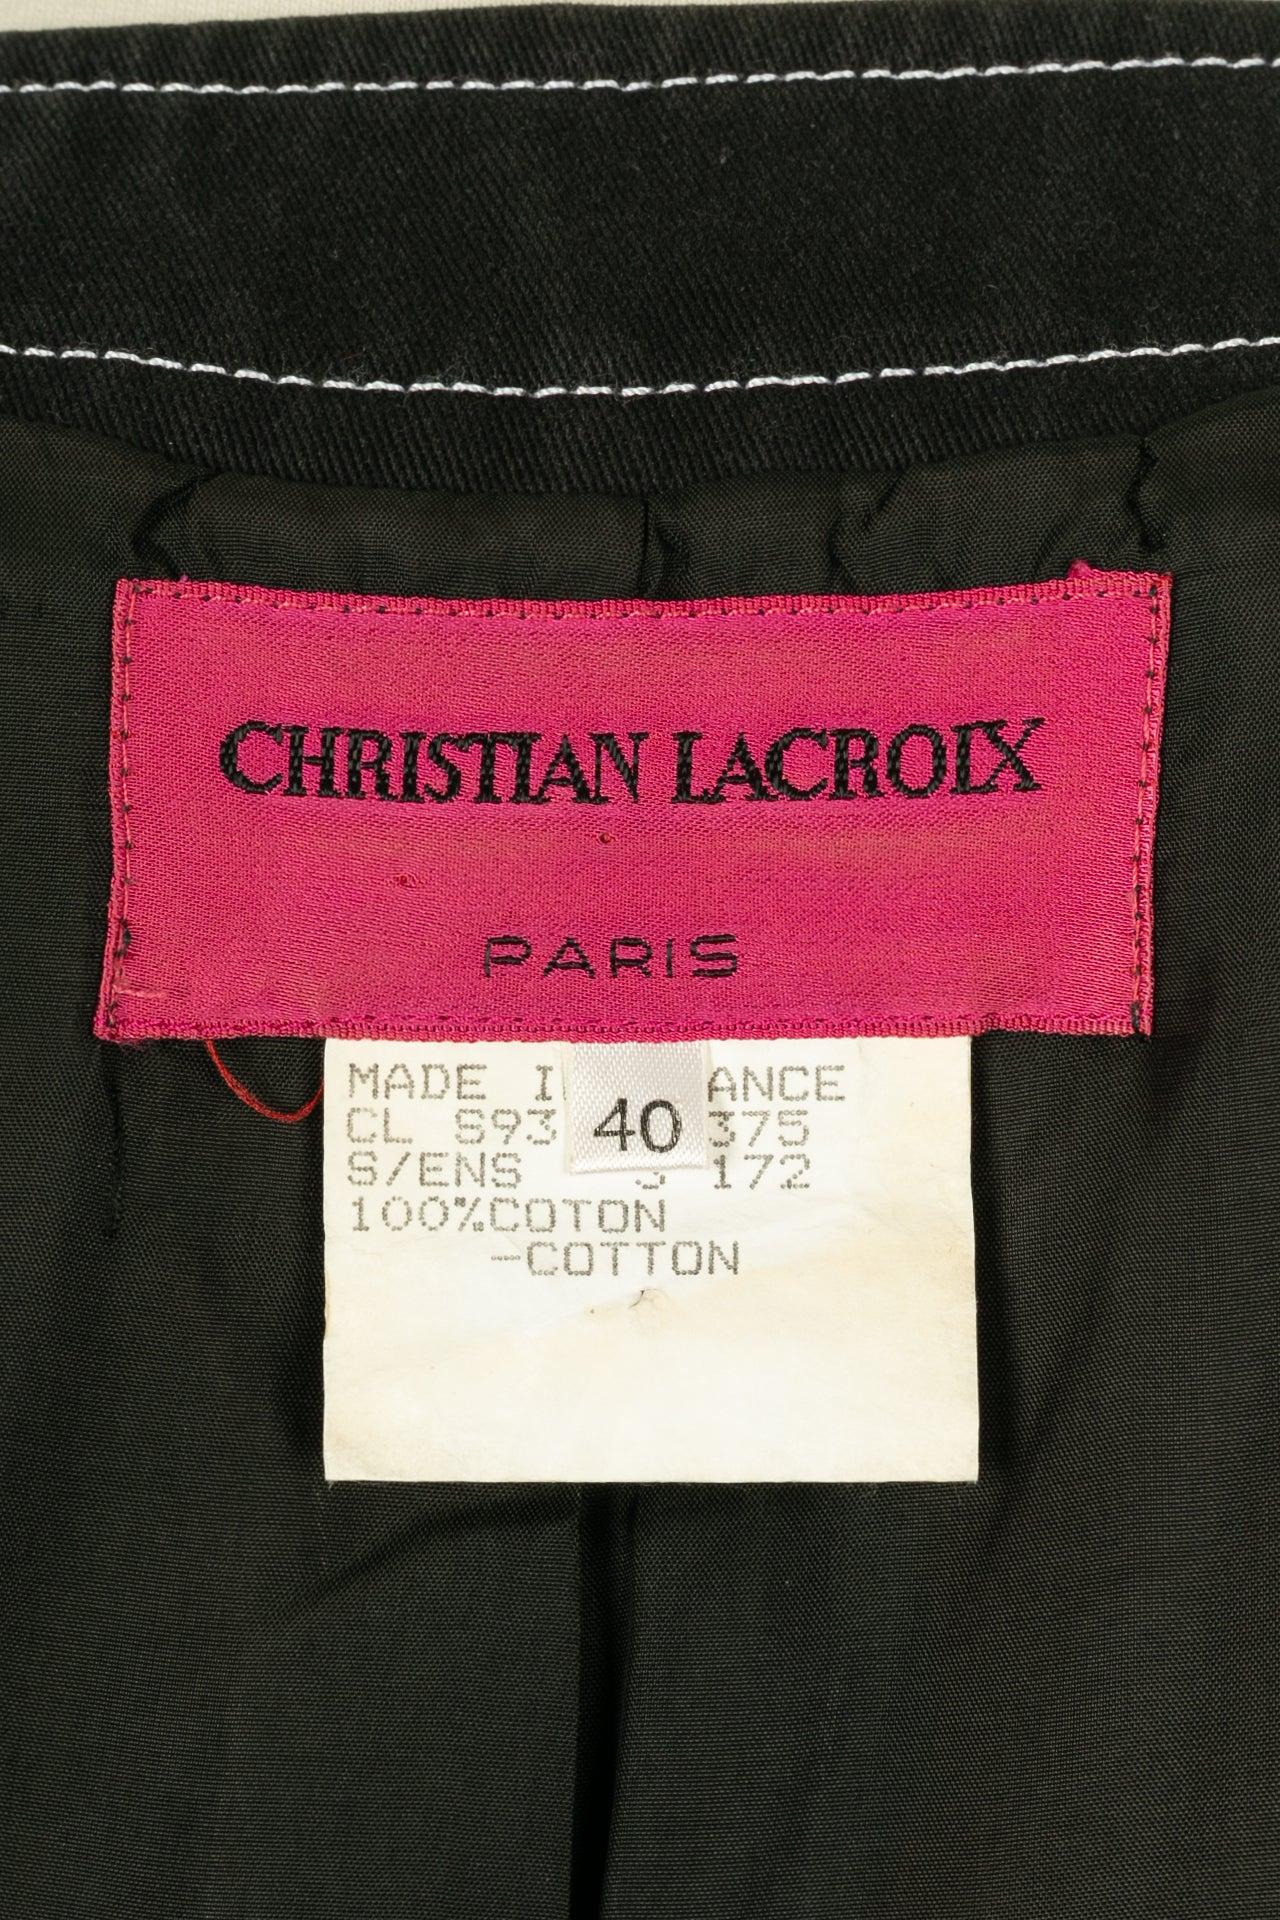 Christian Lacroix Embroidered Top in Black Cotton, 1993 For Sale 2